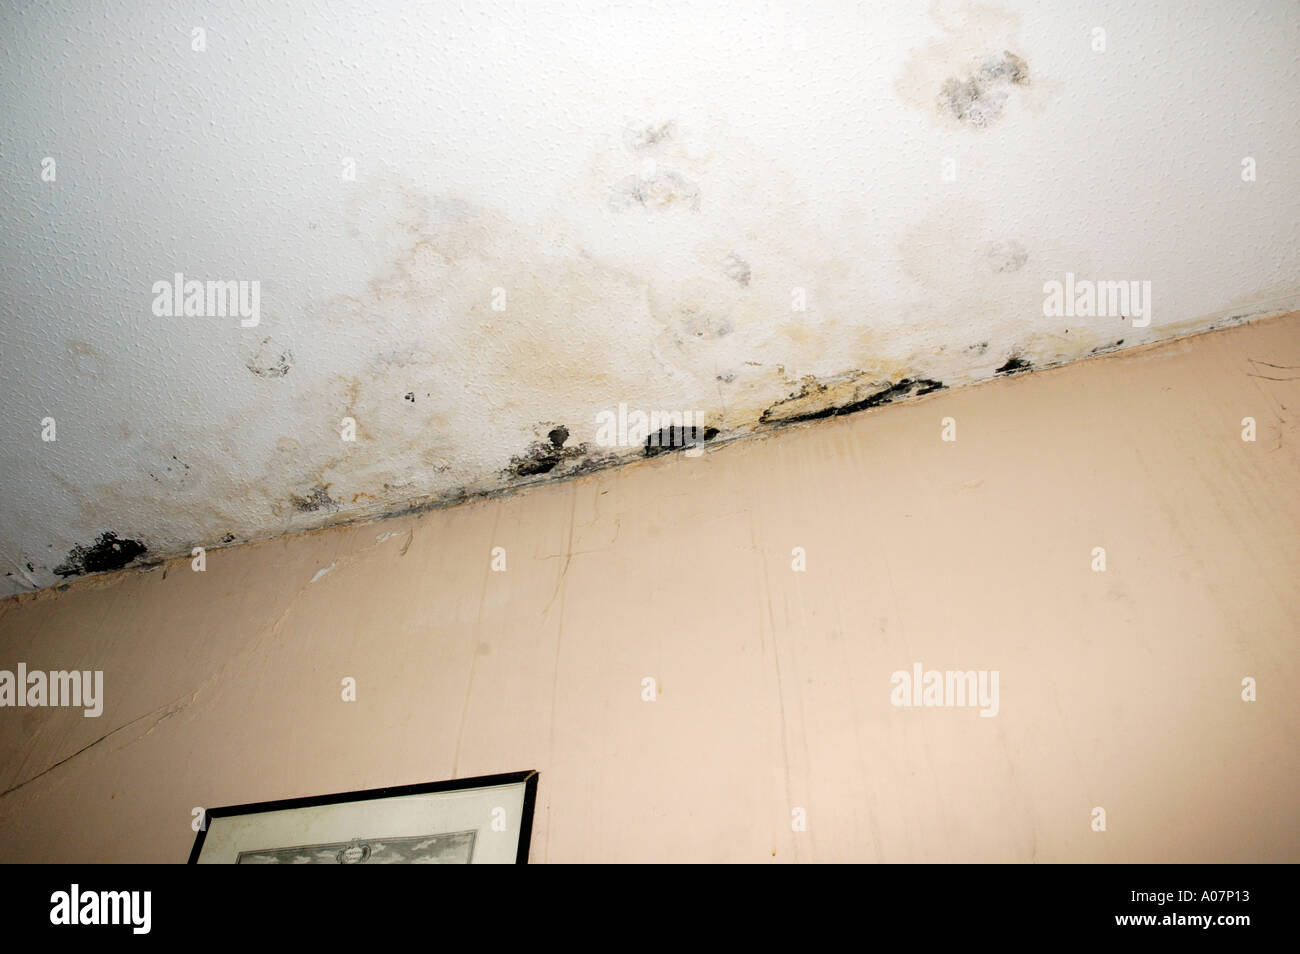 Mould Growth And Plaster Cracking On Ceiling And Walls